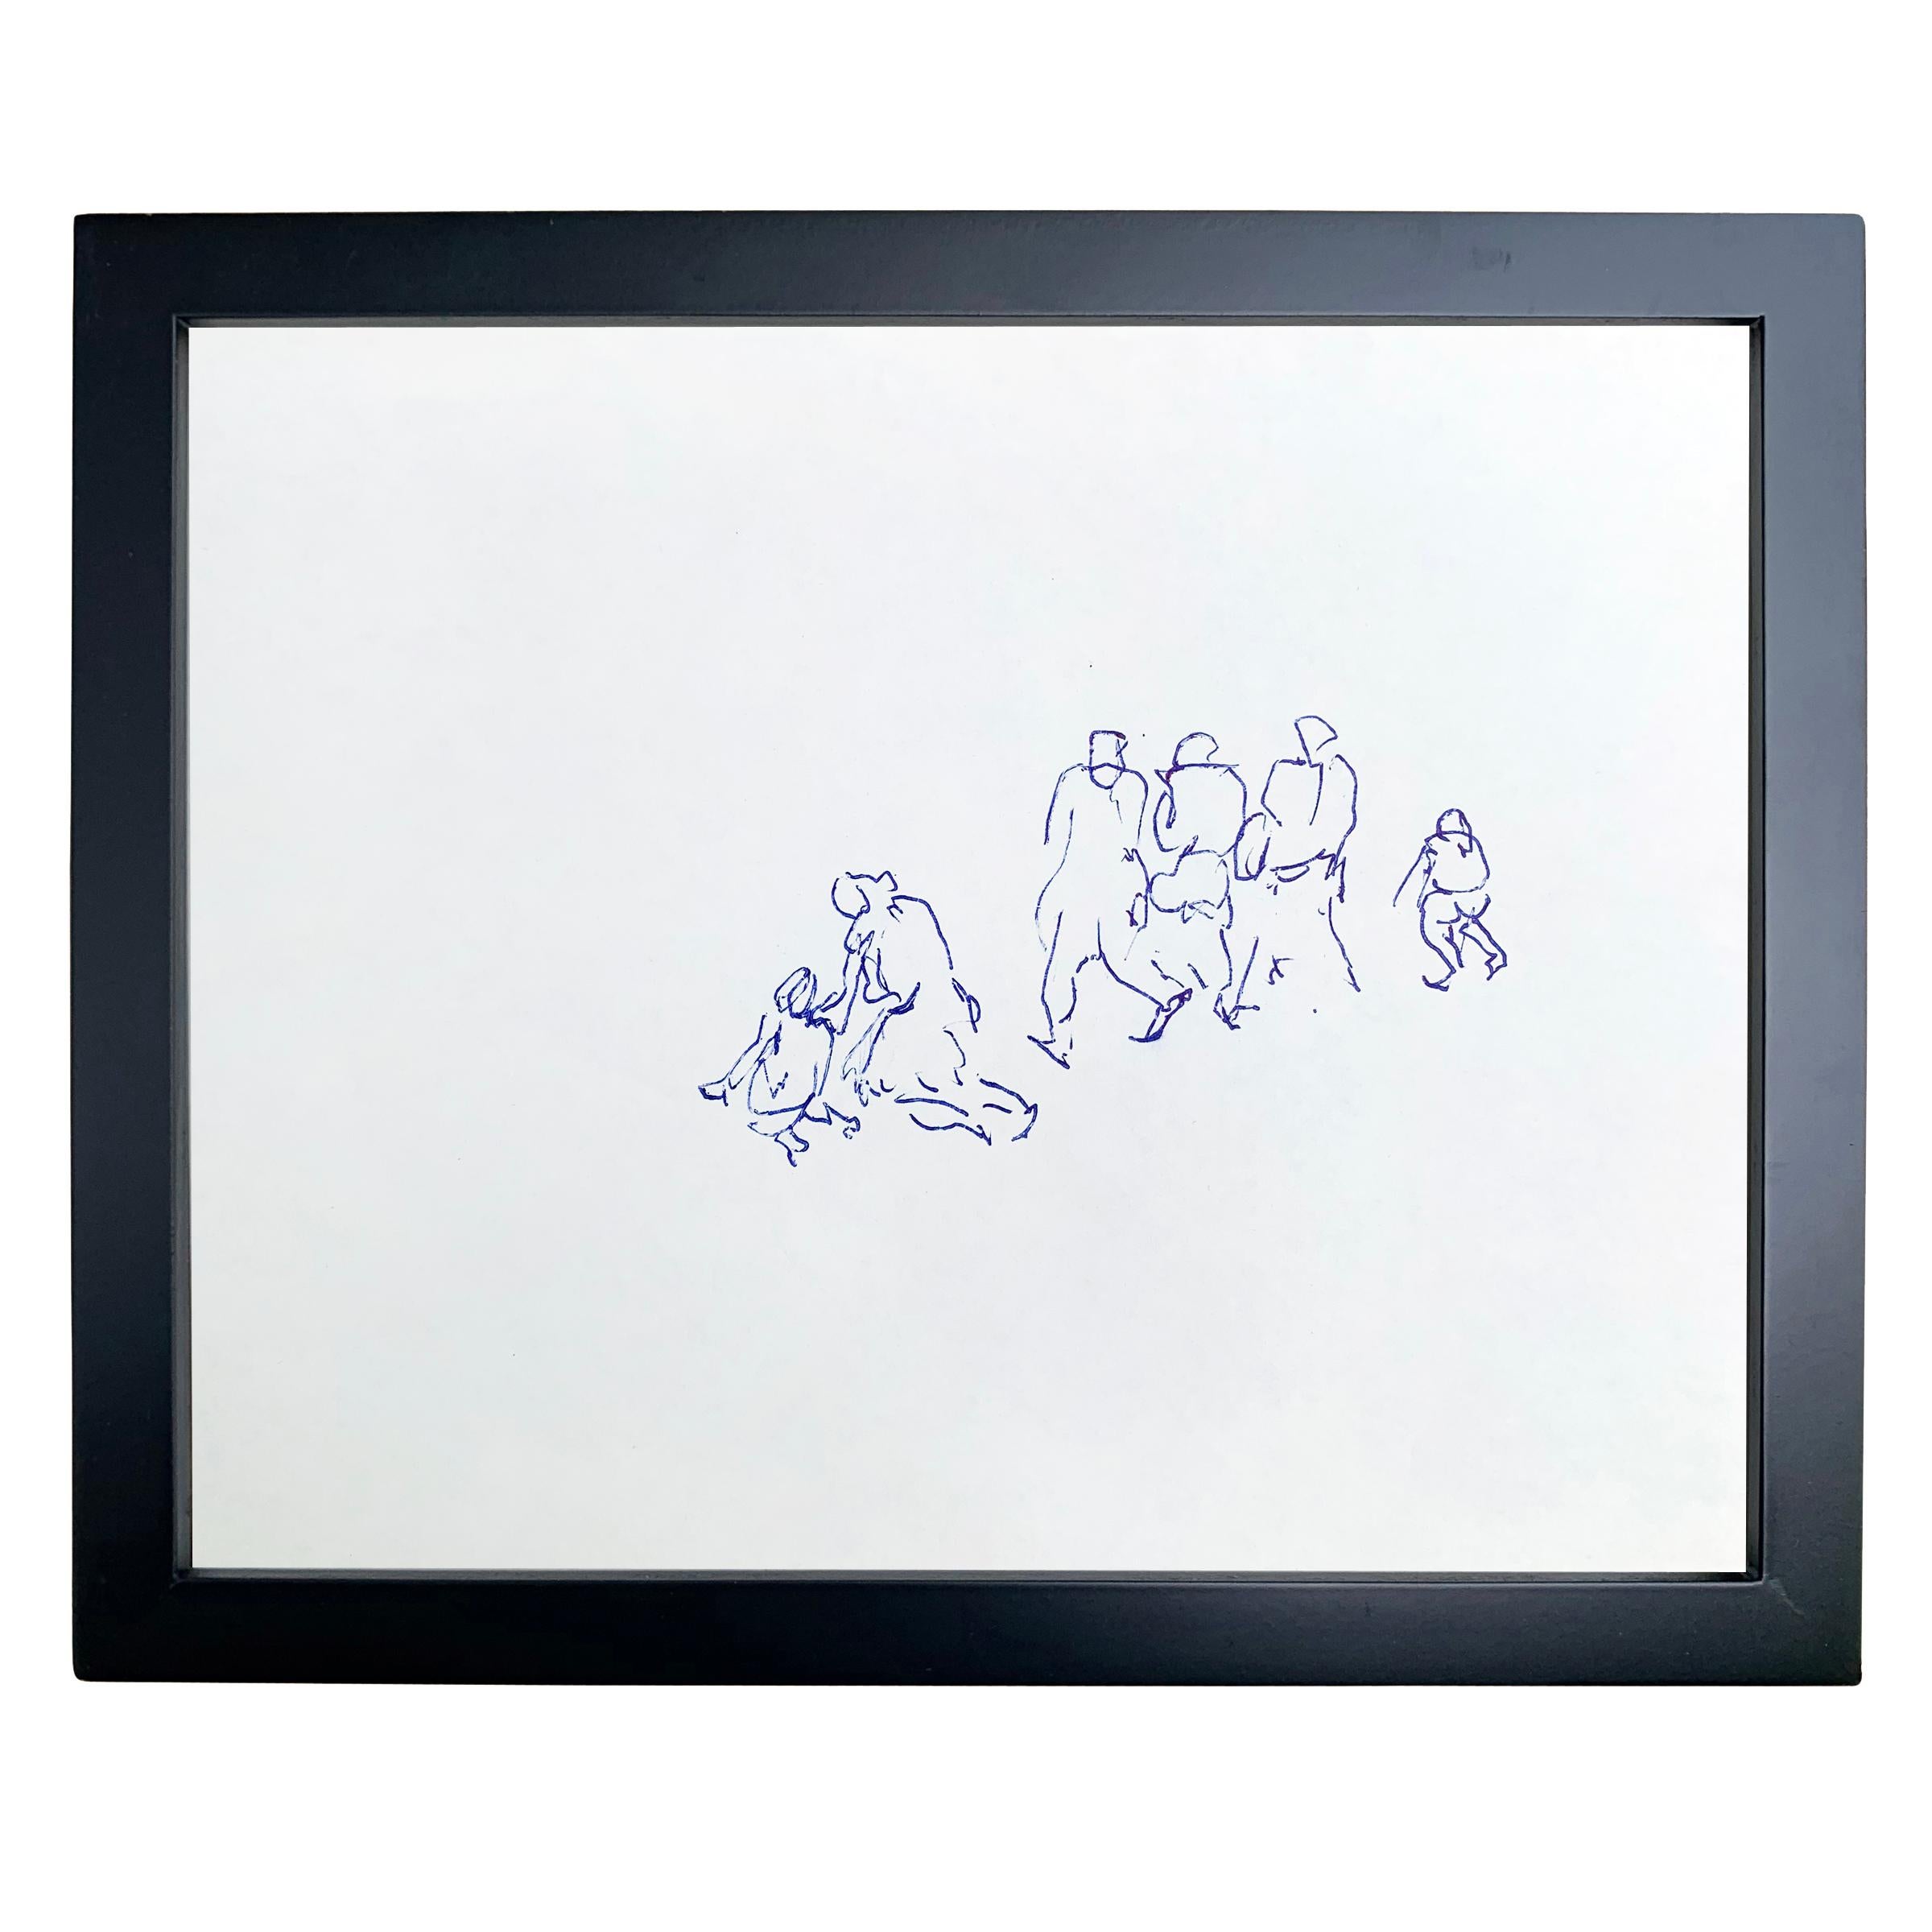 A wonderful set of five framed gestural figure drawings by Paul Chidlaw (1900-1989) depicting groups of people drawn in blue ink on paper.

Paul Chidlaw was an early proponent of abstract expressionism and had a long and distinguished career in